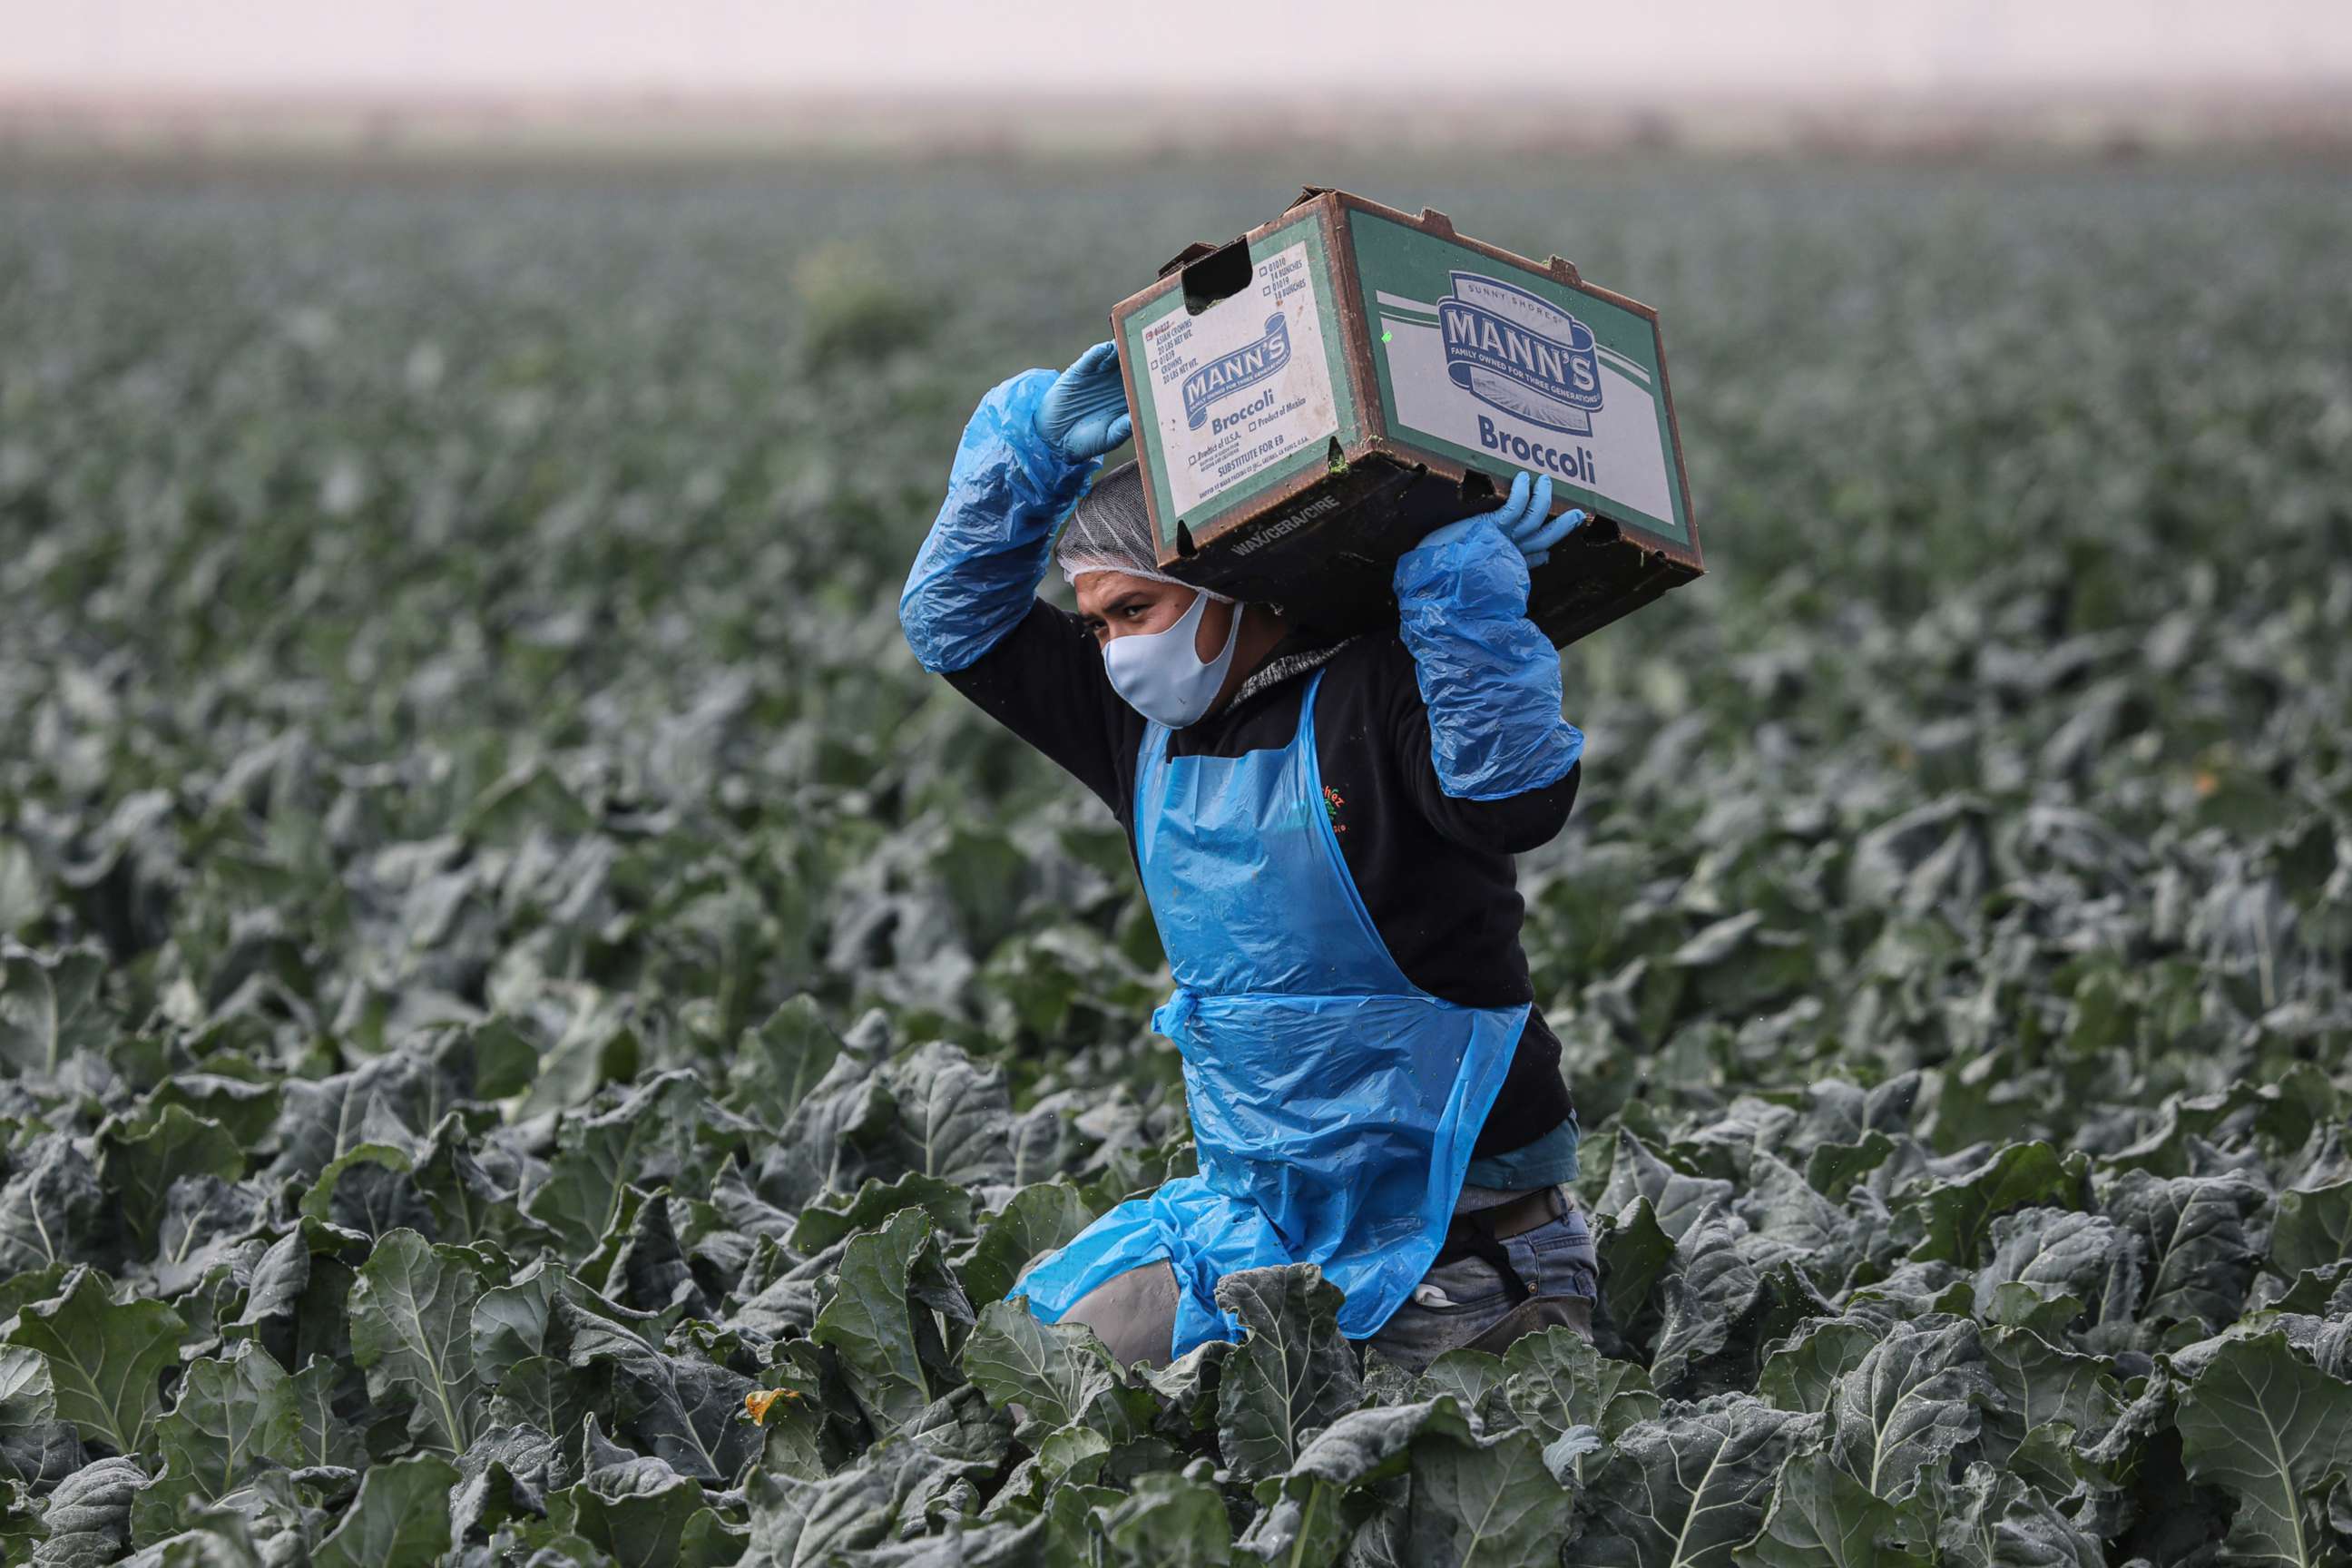 PHOTO: In this Jan. 22, 2021, file photo, a farmworker carries a box of broccoli in a field in Calexico, Calif.